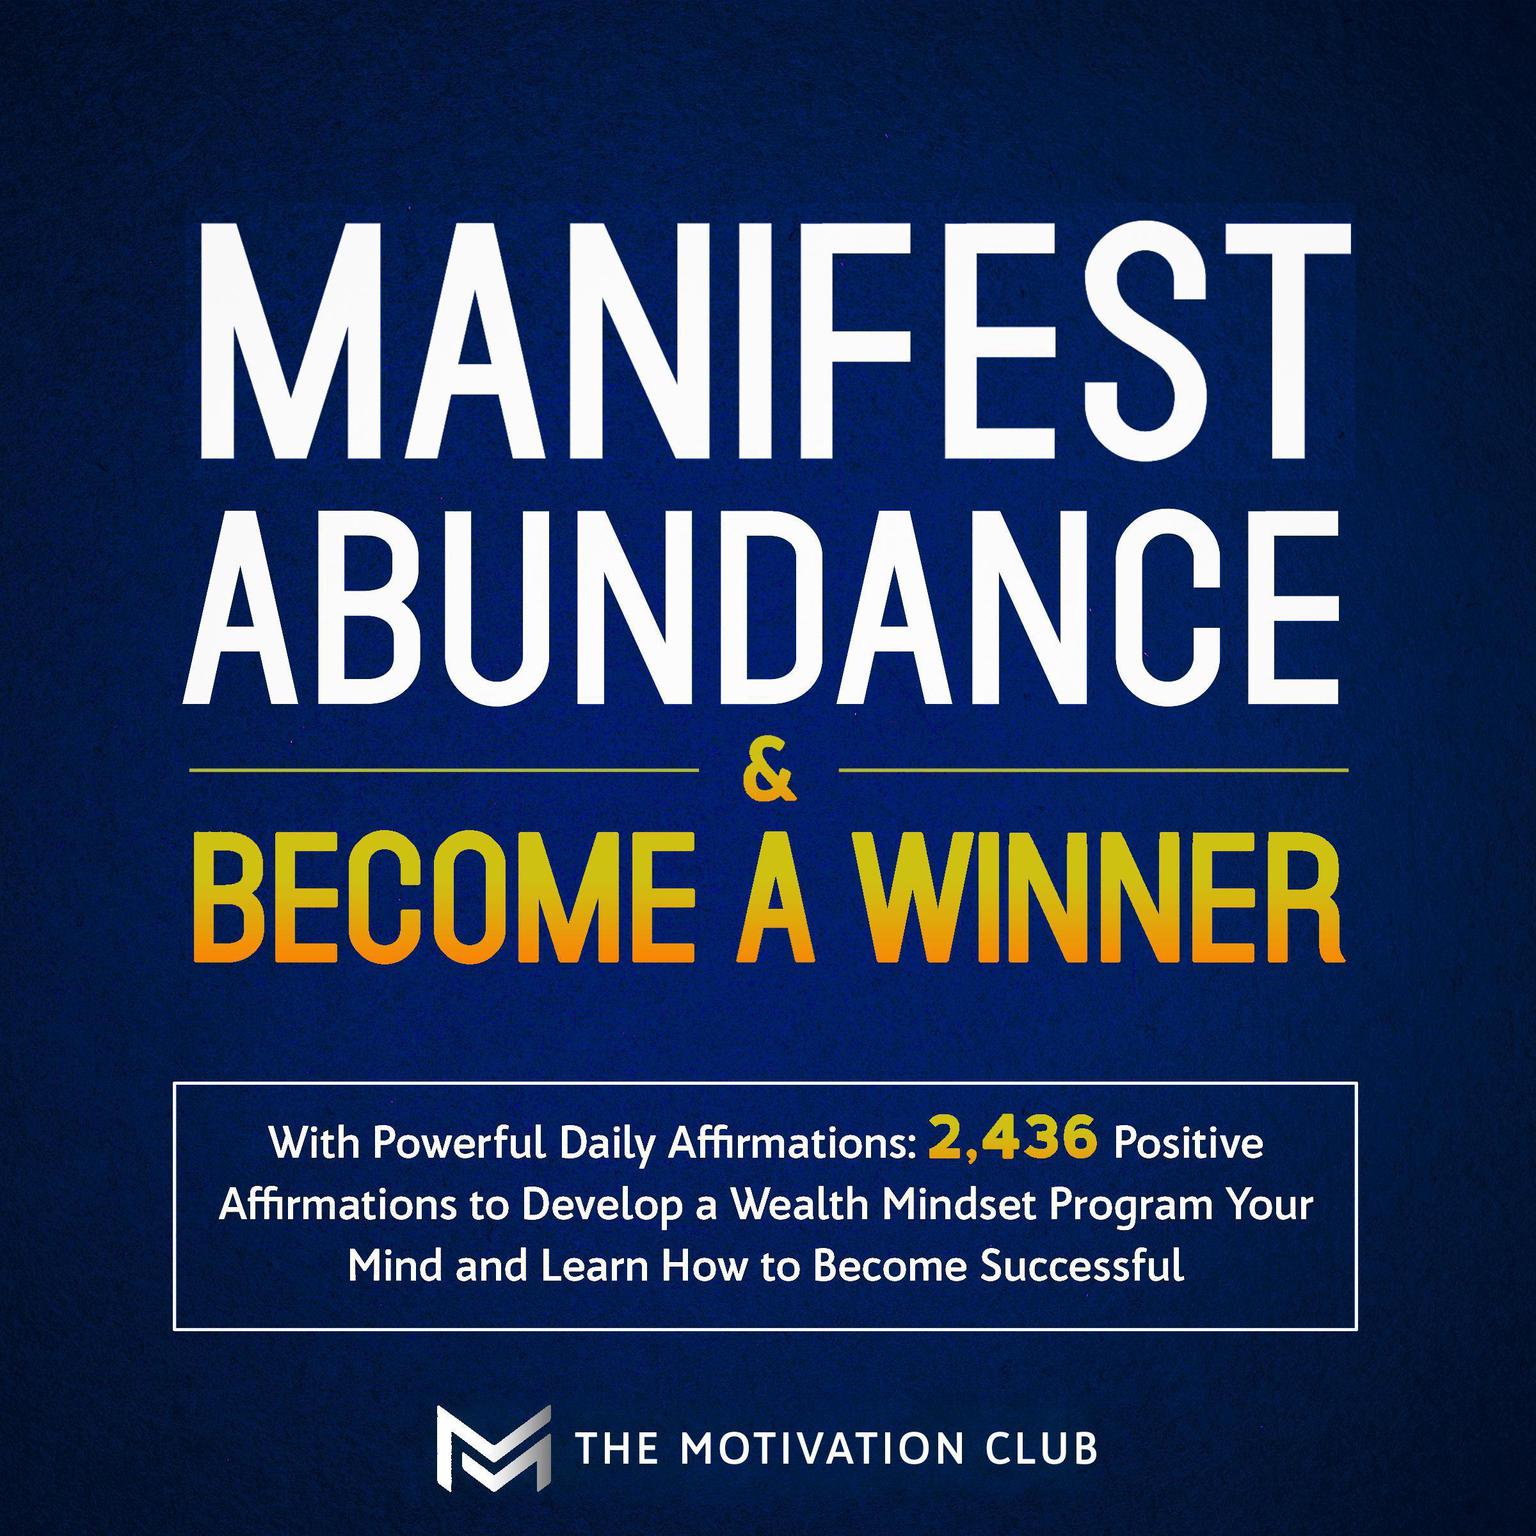 Manifest Abundance and Become a Winner: With Powerful Daily Affirmations 2,436 Positive Affirmations to Develop a Wealth Mindset Program Your Mind and Learn How to Become Successful Audiobook, by The Motivation Club